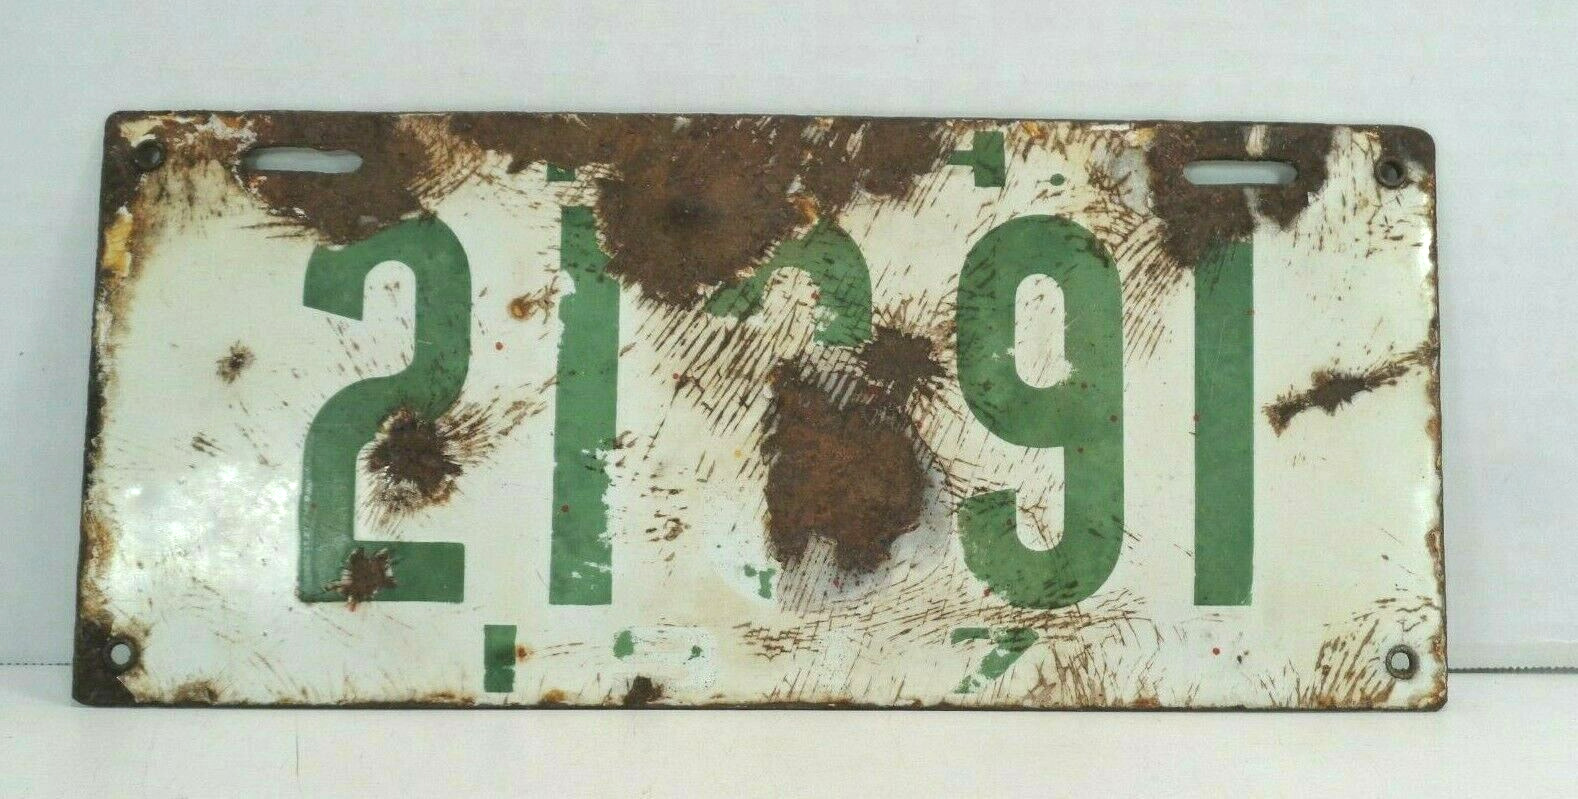 1917 NH New Hampshire Vintage License Plate 21391